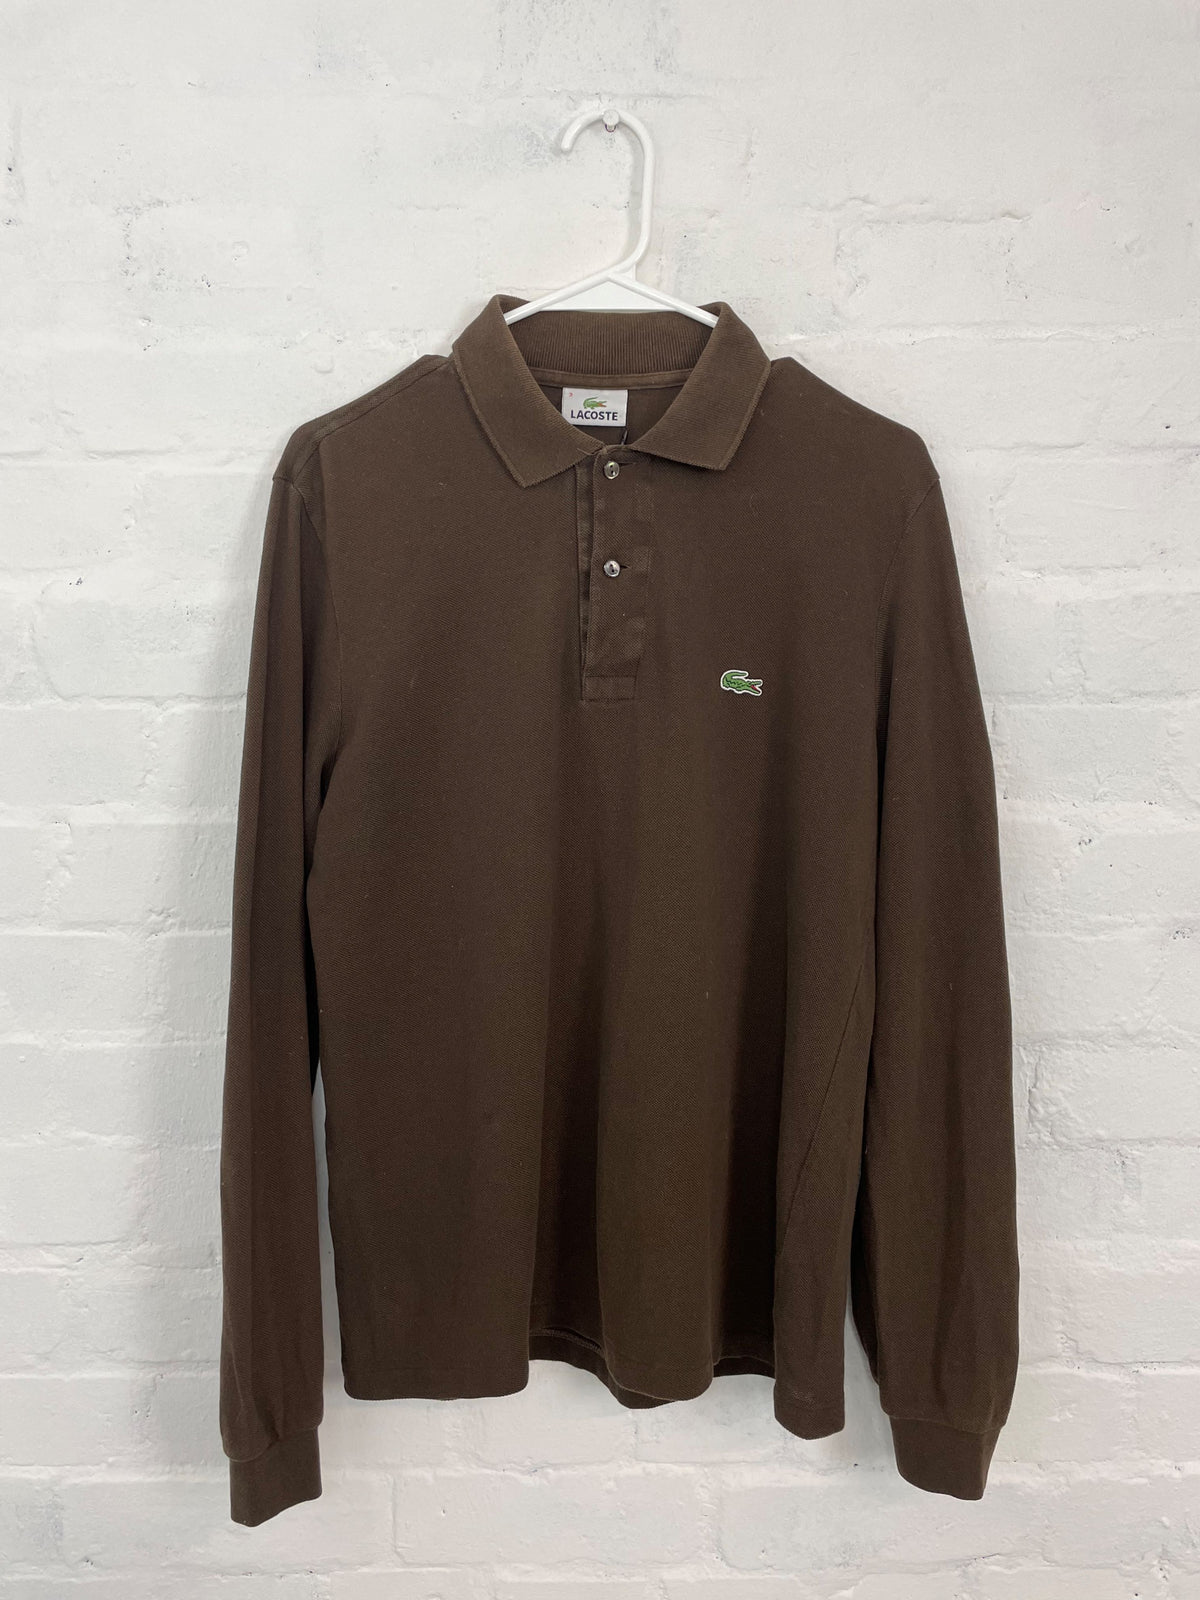 Lacoste brown long-sleeve polo shirt, Size L